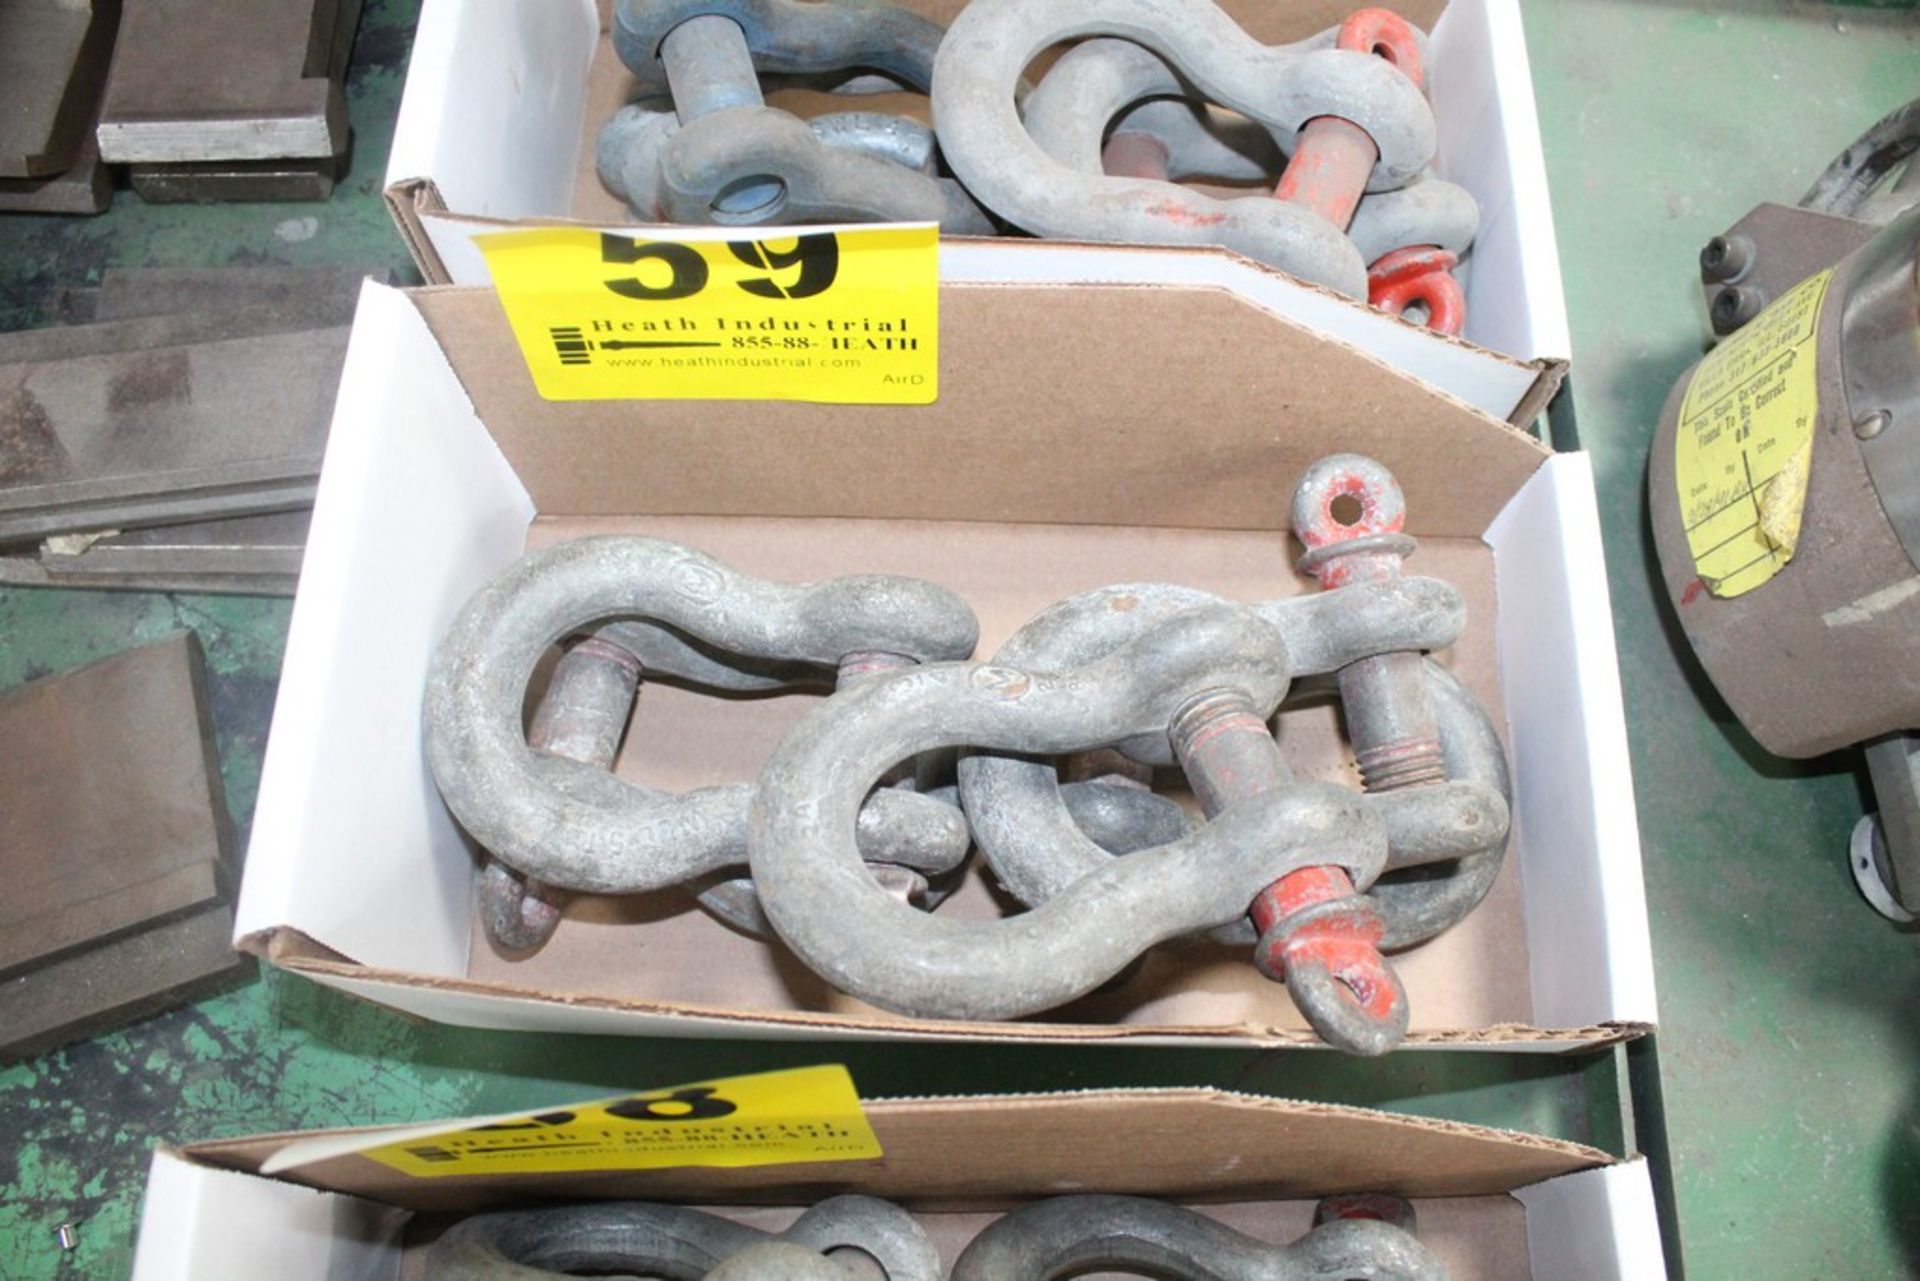 LARGE QUANTITY OF SHACKLES